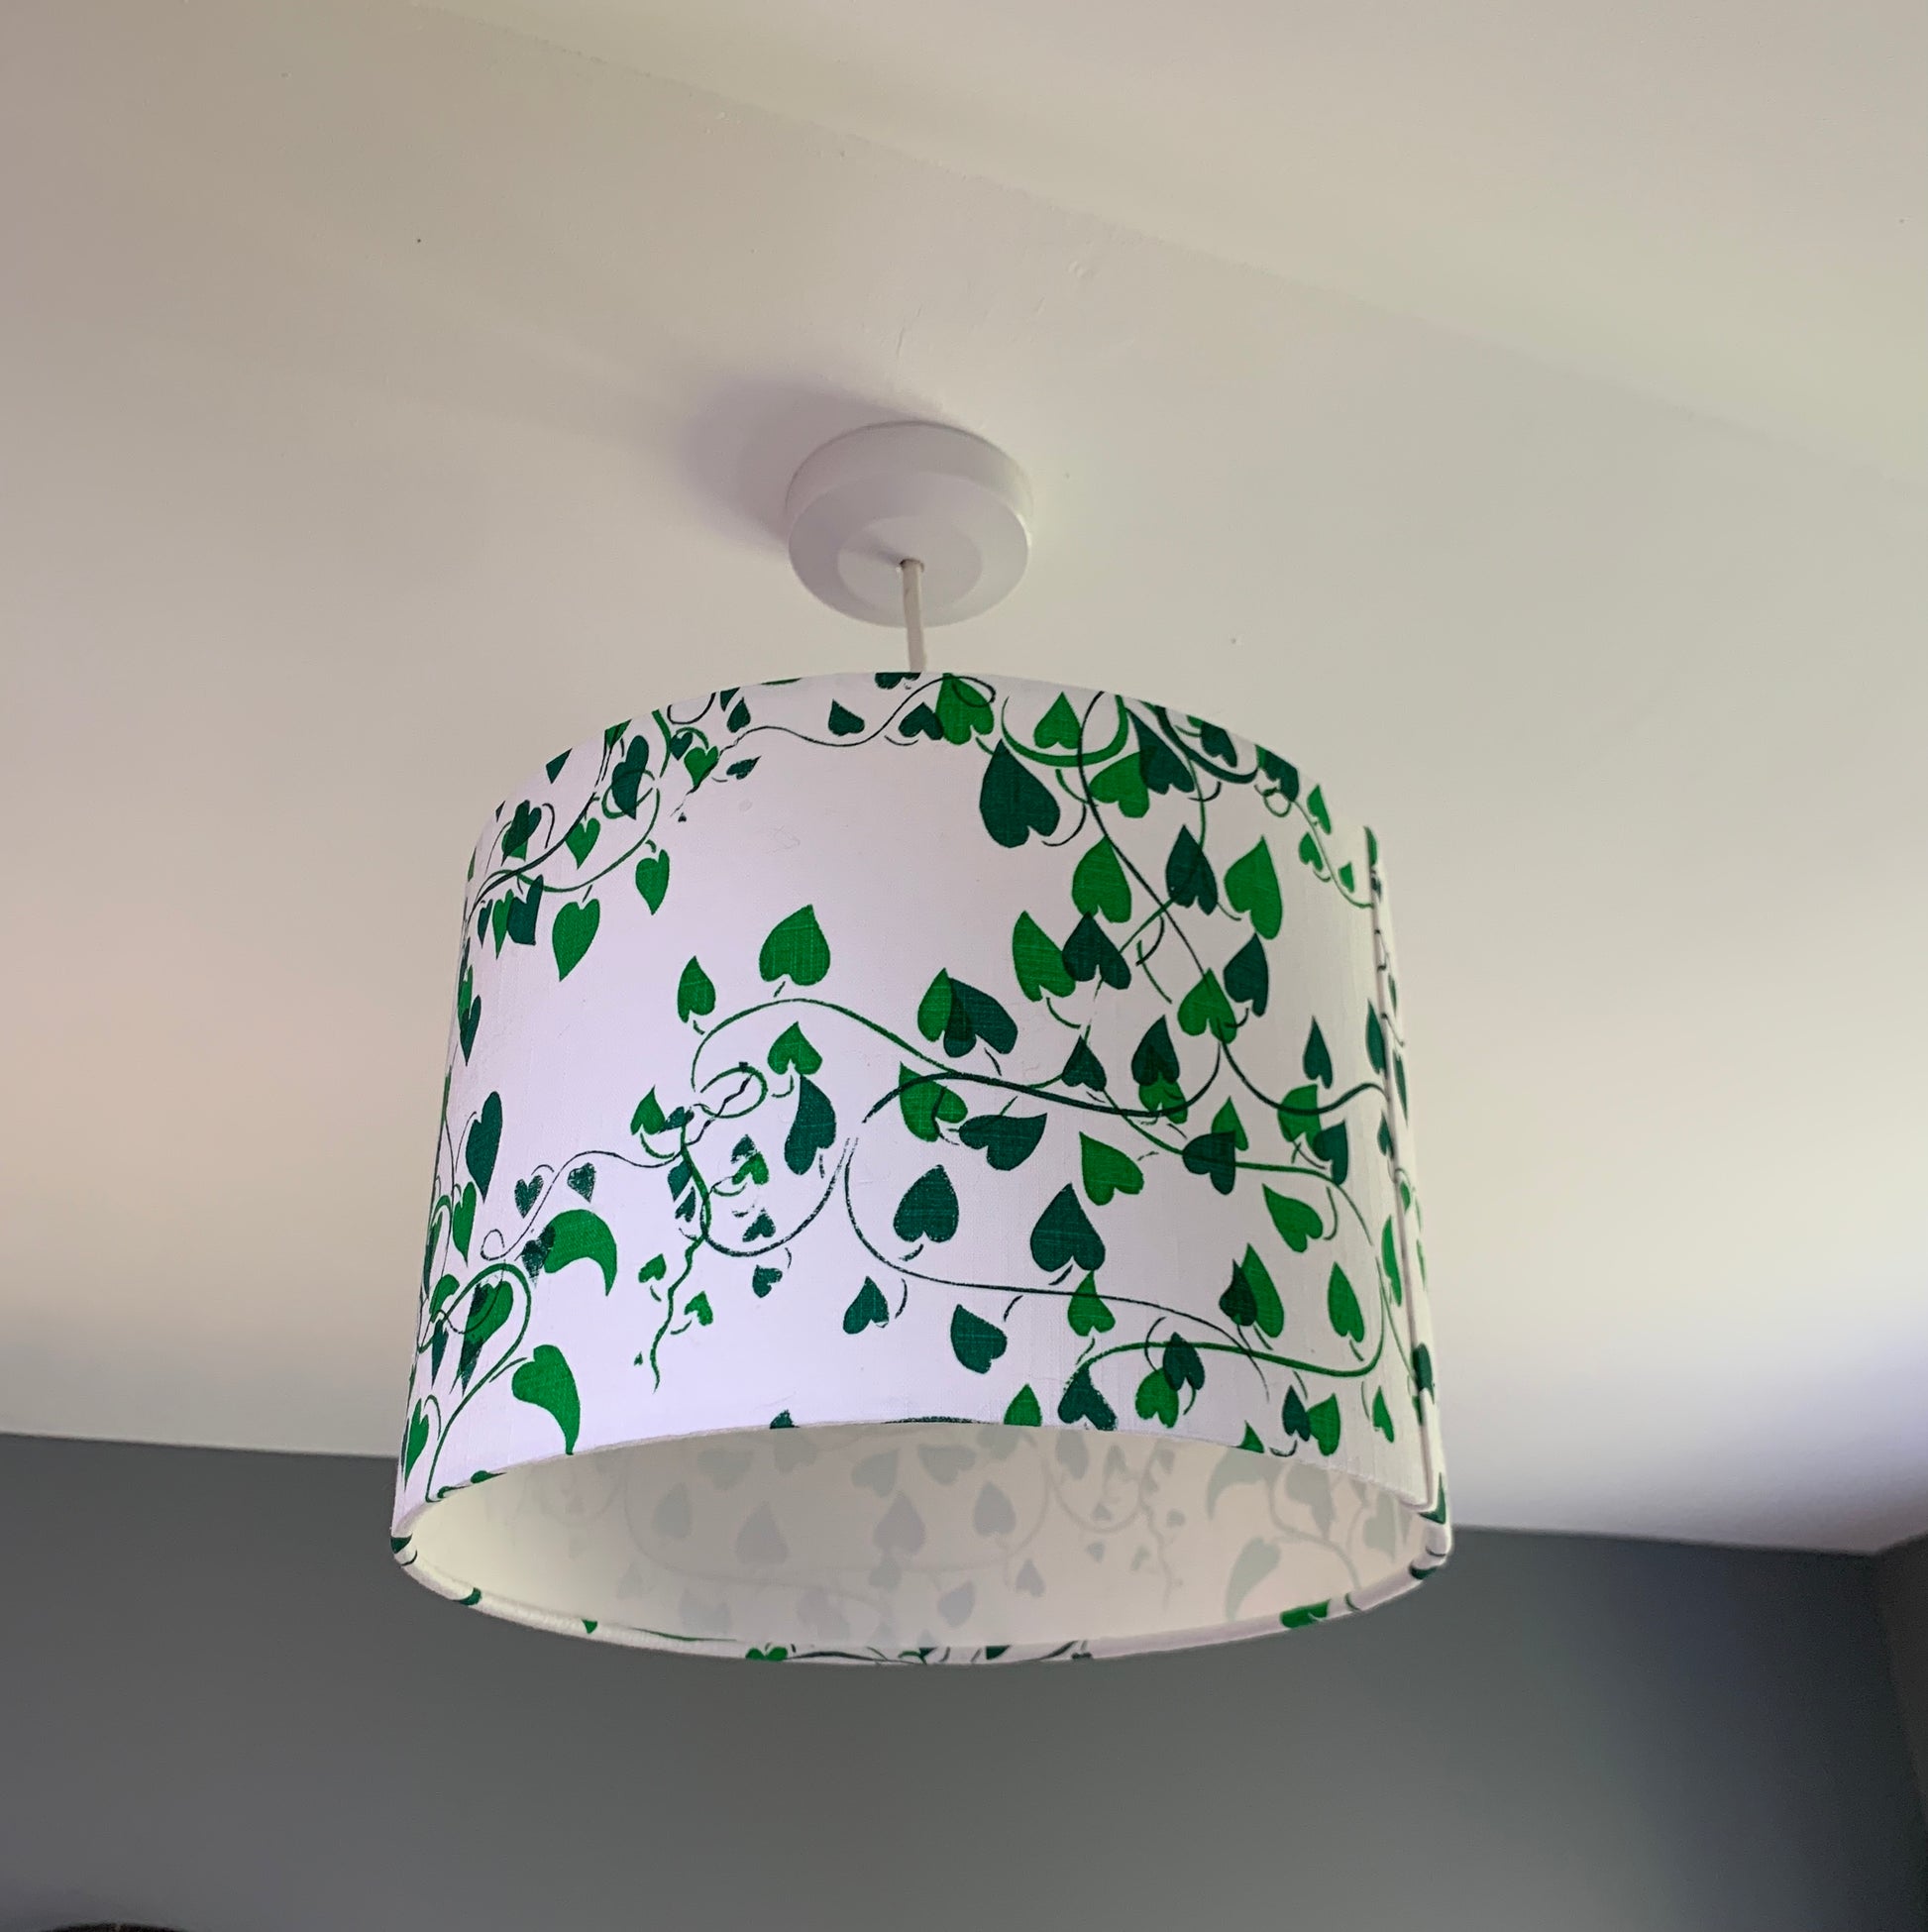 Shades of green on white fabric  handprinted lampshade in  a convolvulus design ceiling hung.